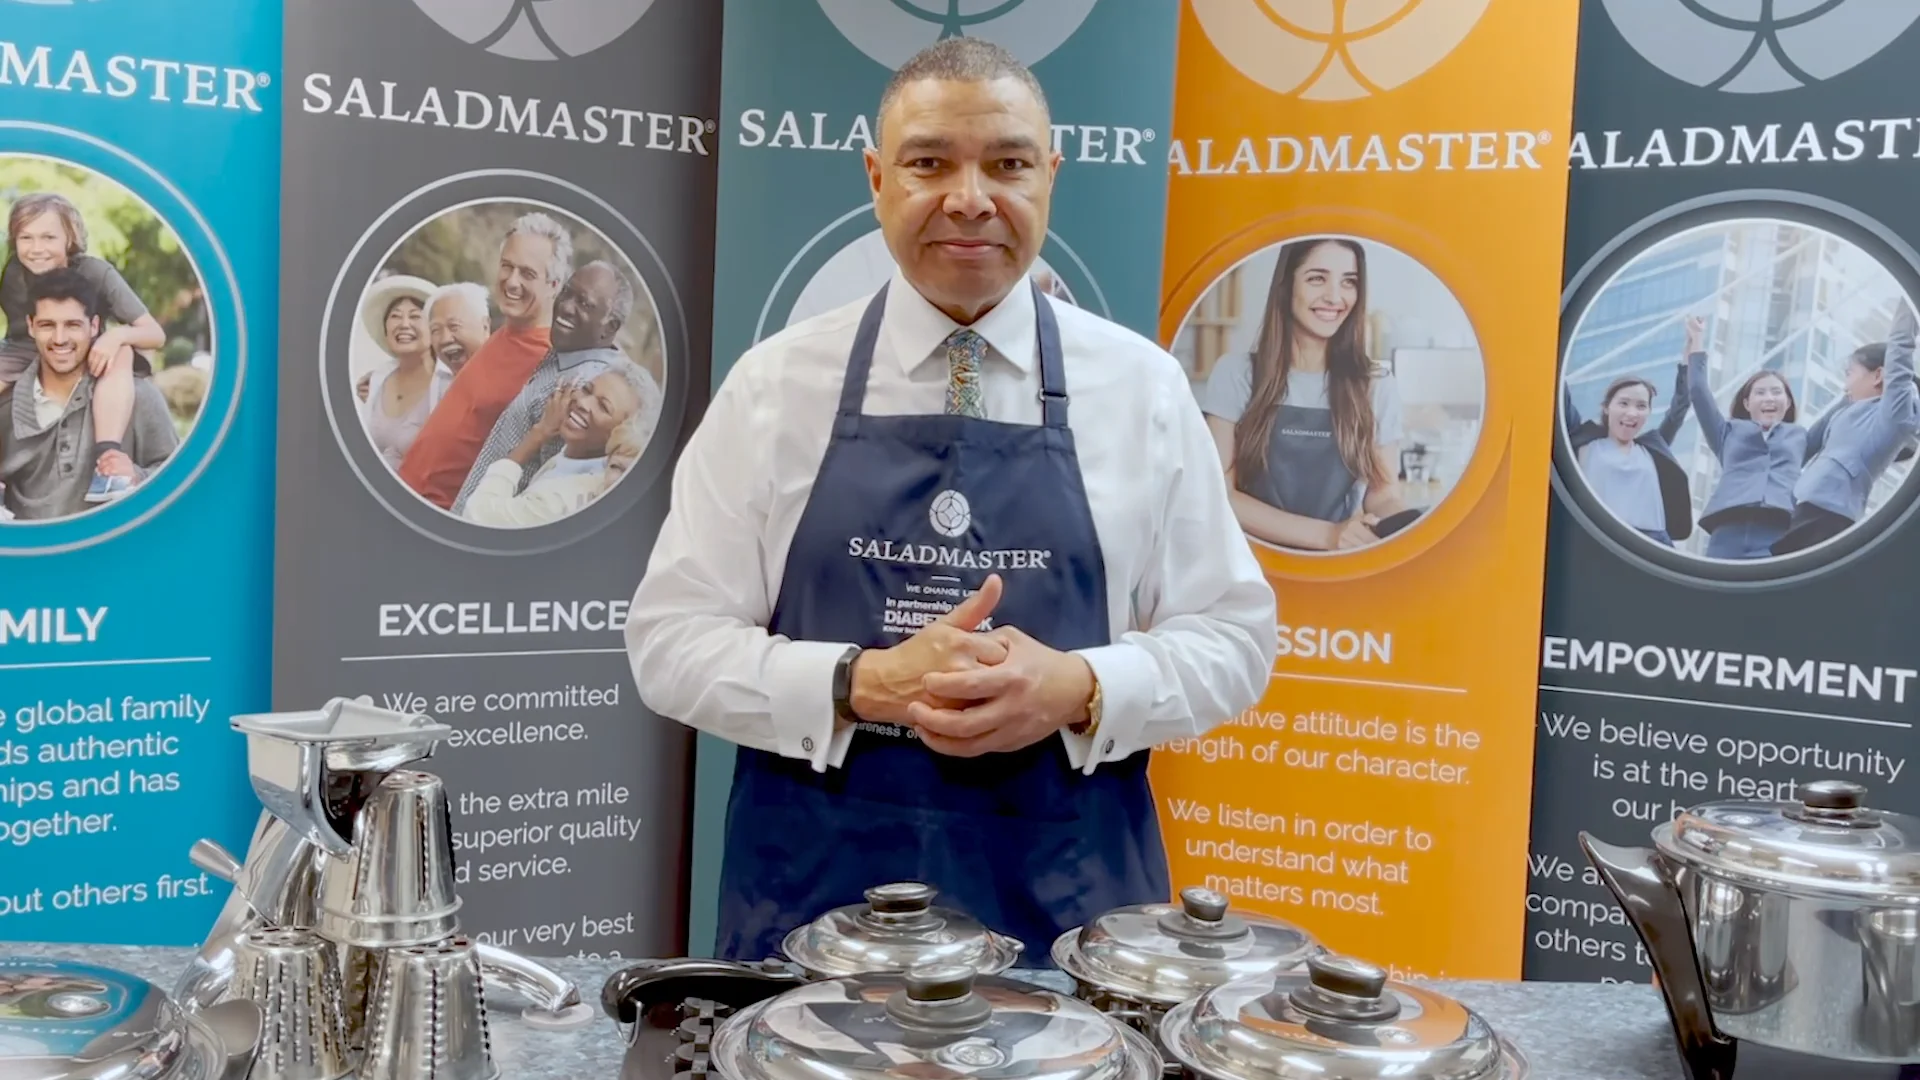 Saladmaster - Welcome to the Saladmaster Family! We love being